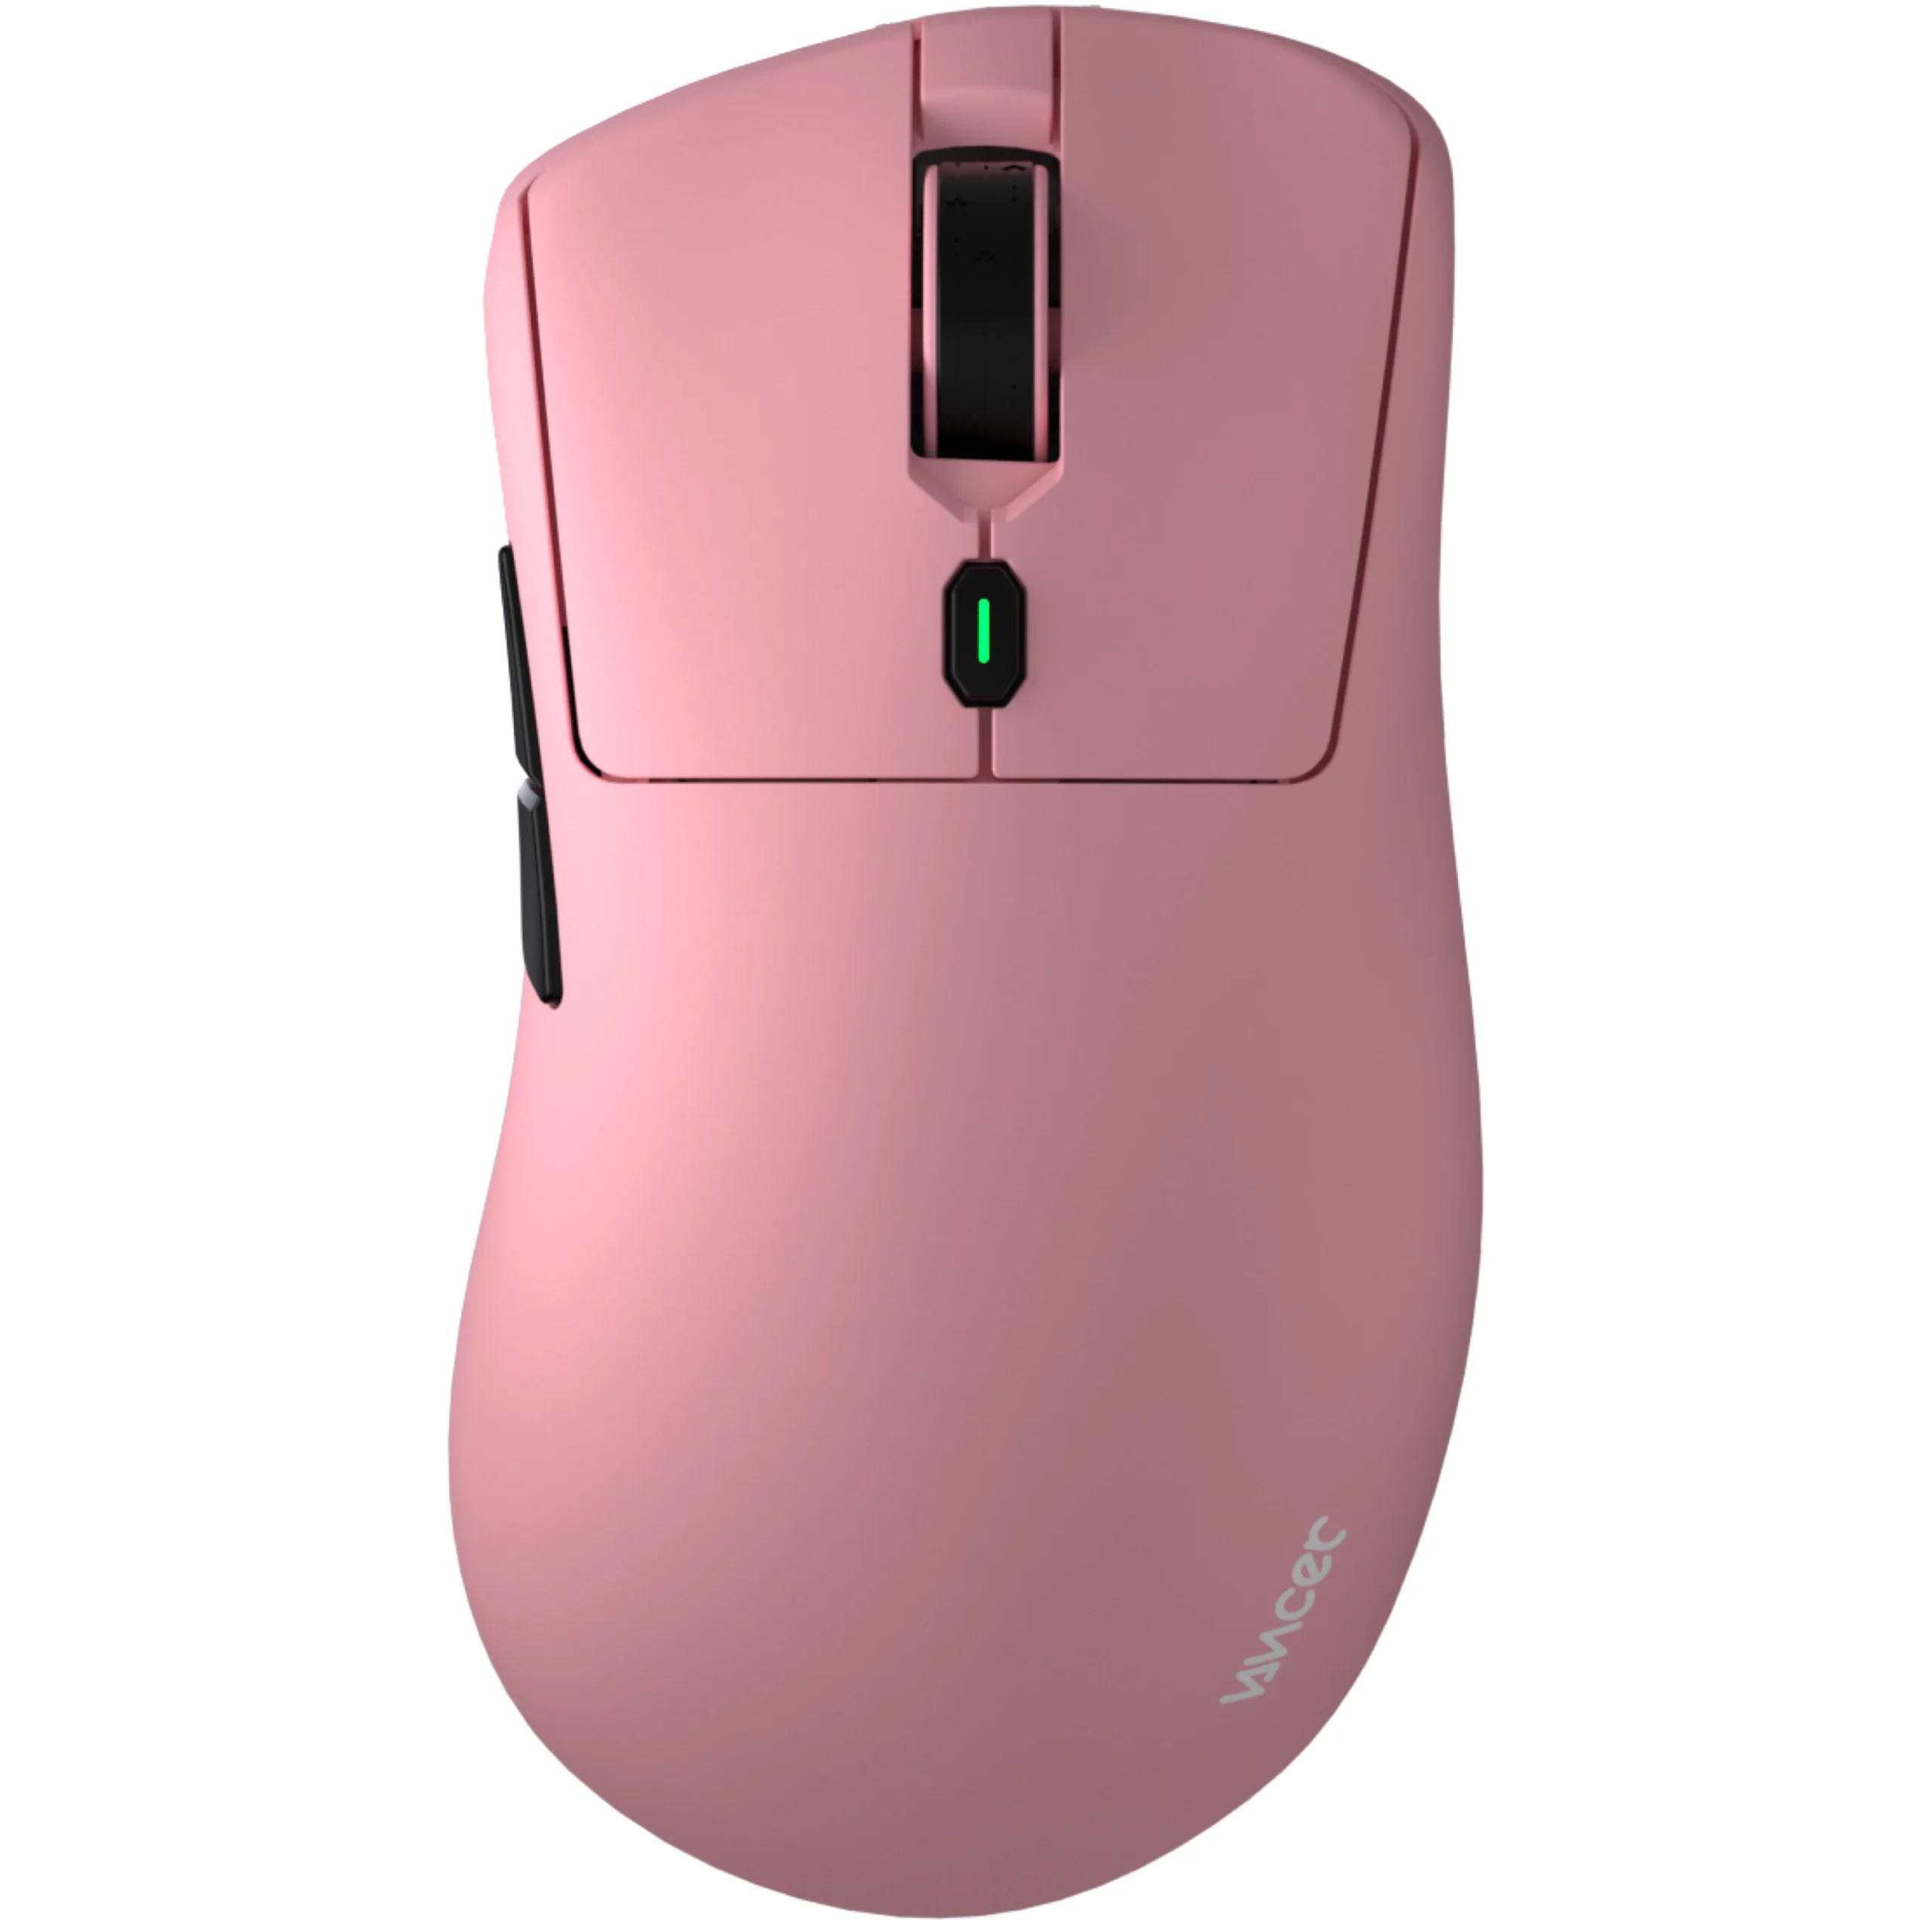 Vancer Pollux Pro - Wireless Gaming Mouse